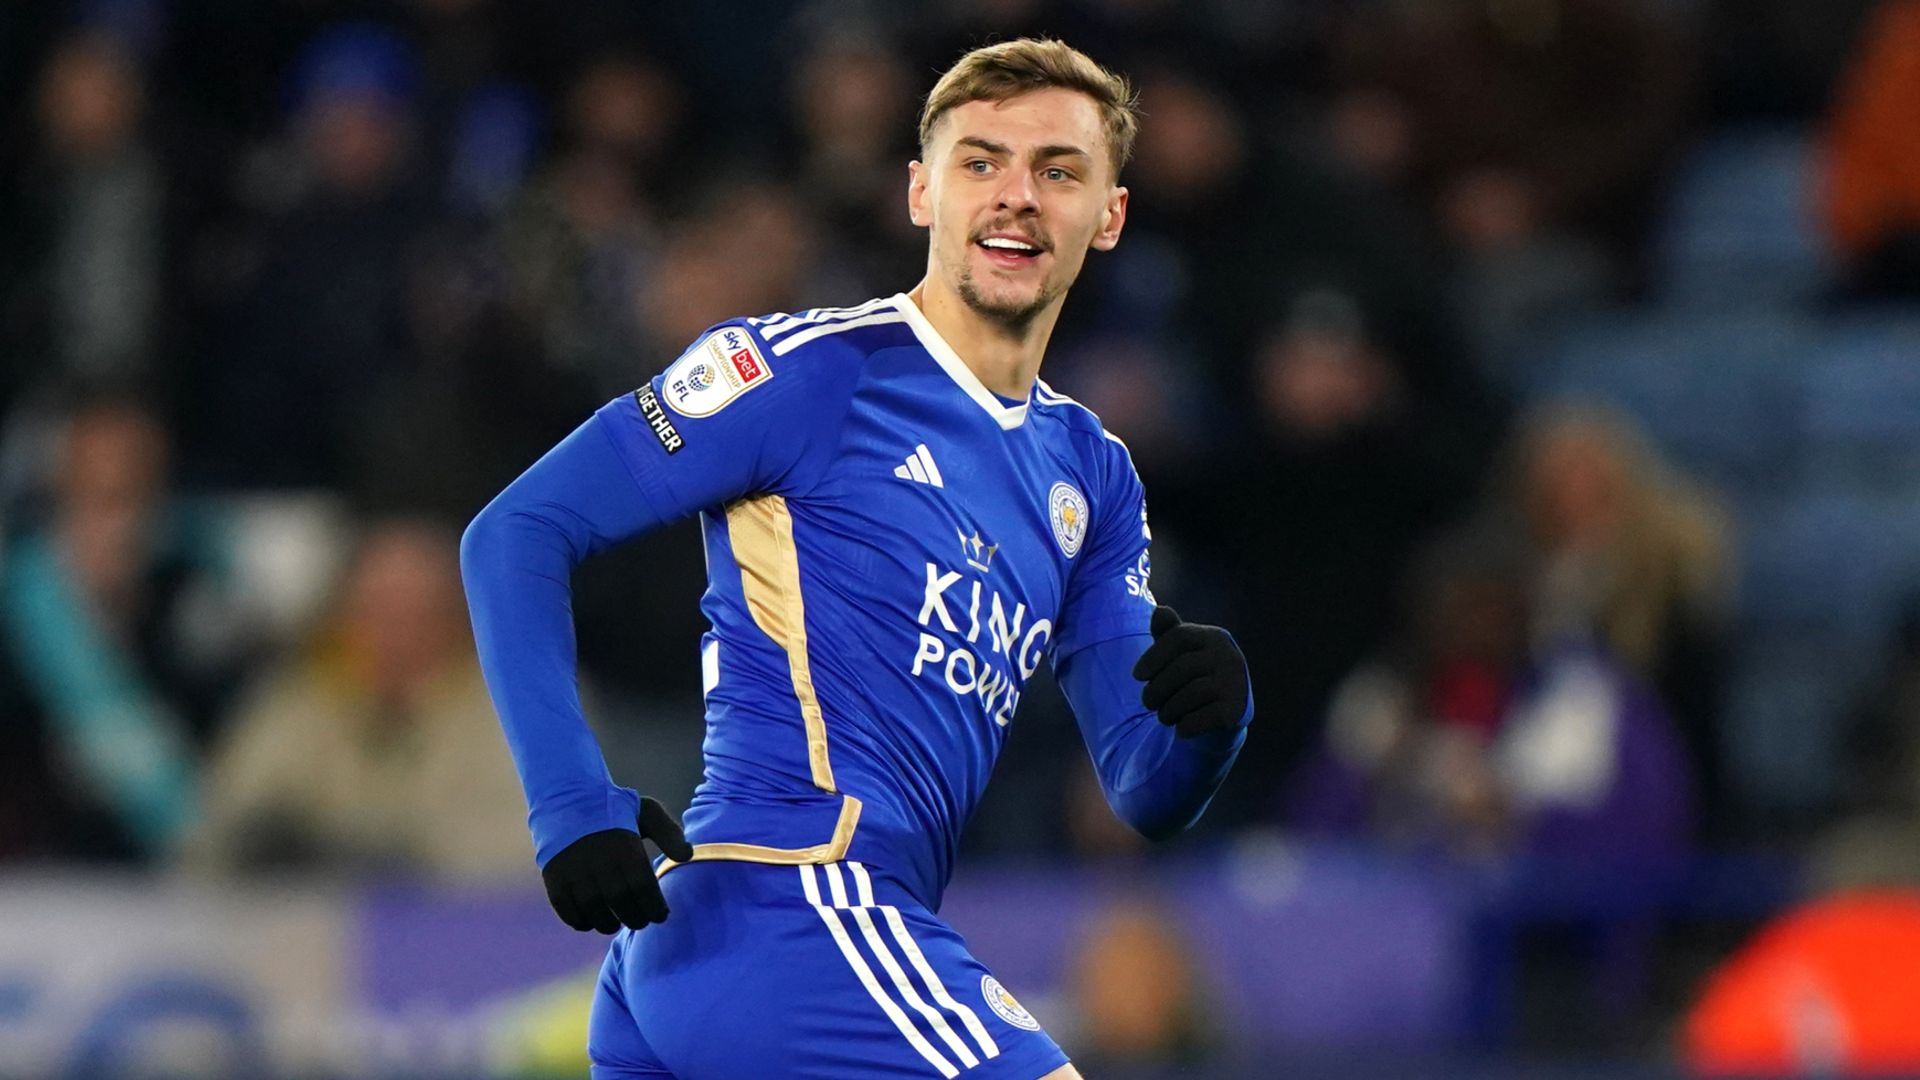 Leicester ease past Swansea to move 10 points clear at Championship summit